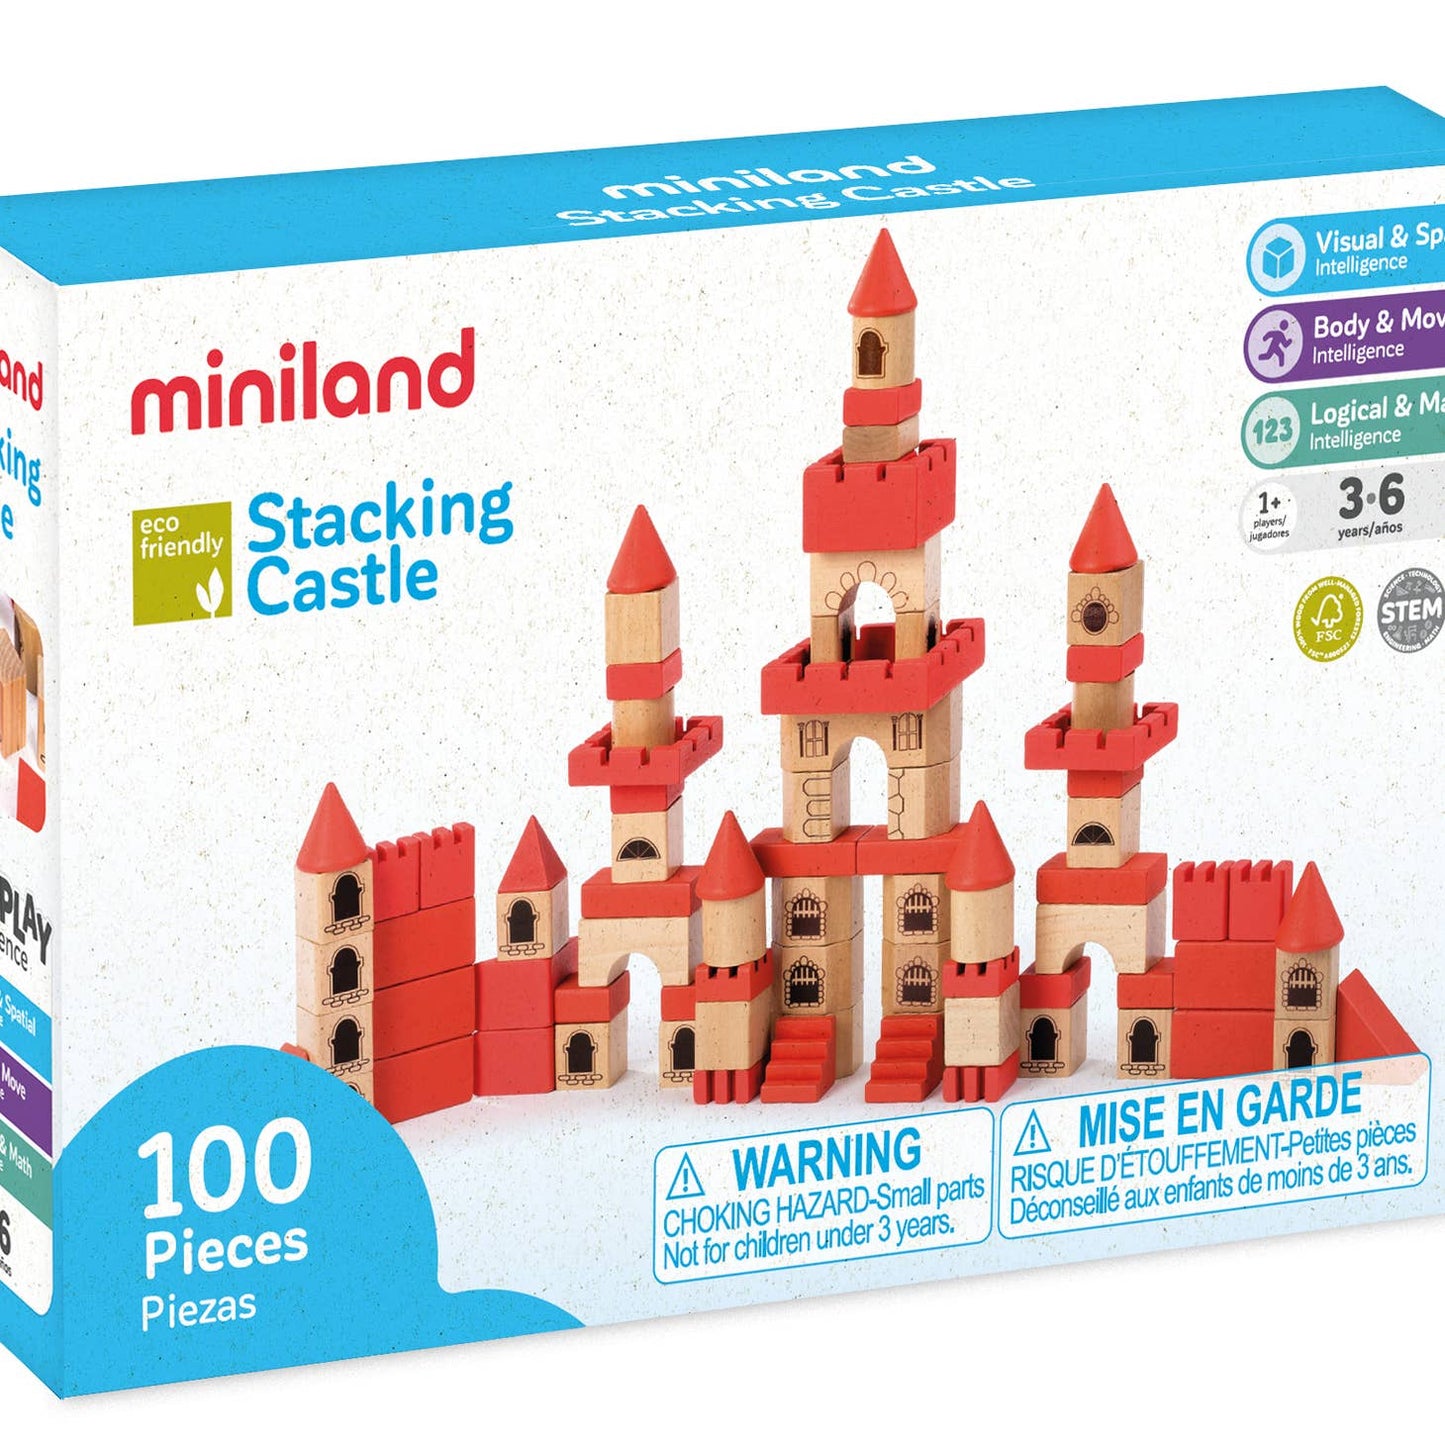 Stacking Castle Wooden Blocks - 100 Pieces